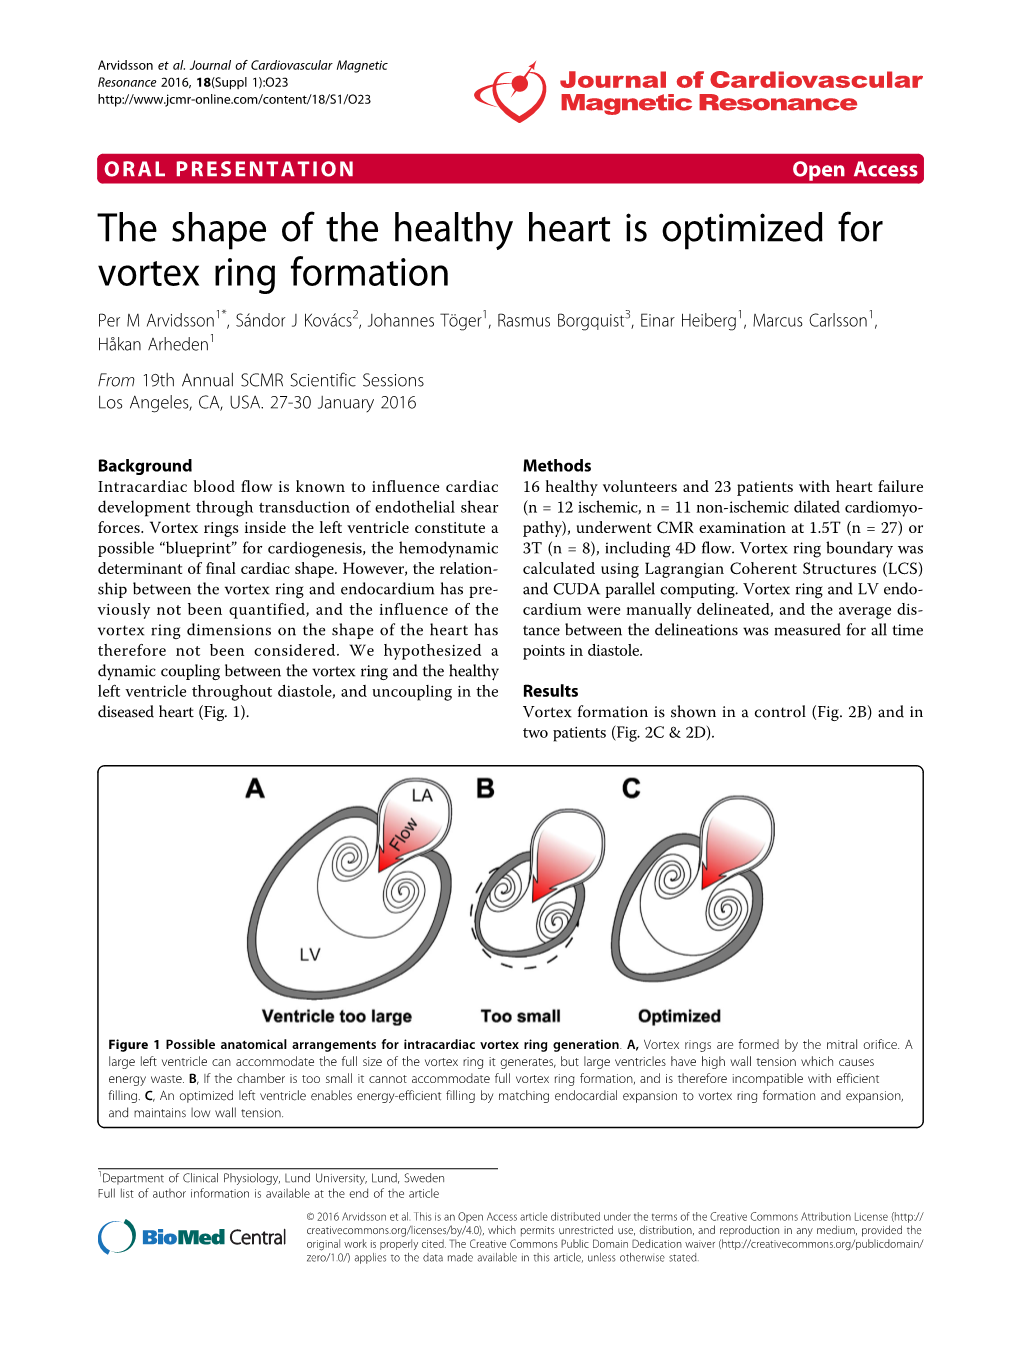 The Shape of the Healthy Heart Is Optimized for Vortex Ring Formation